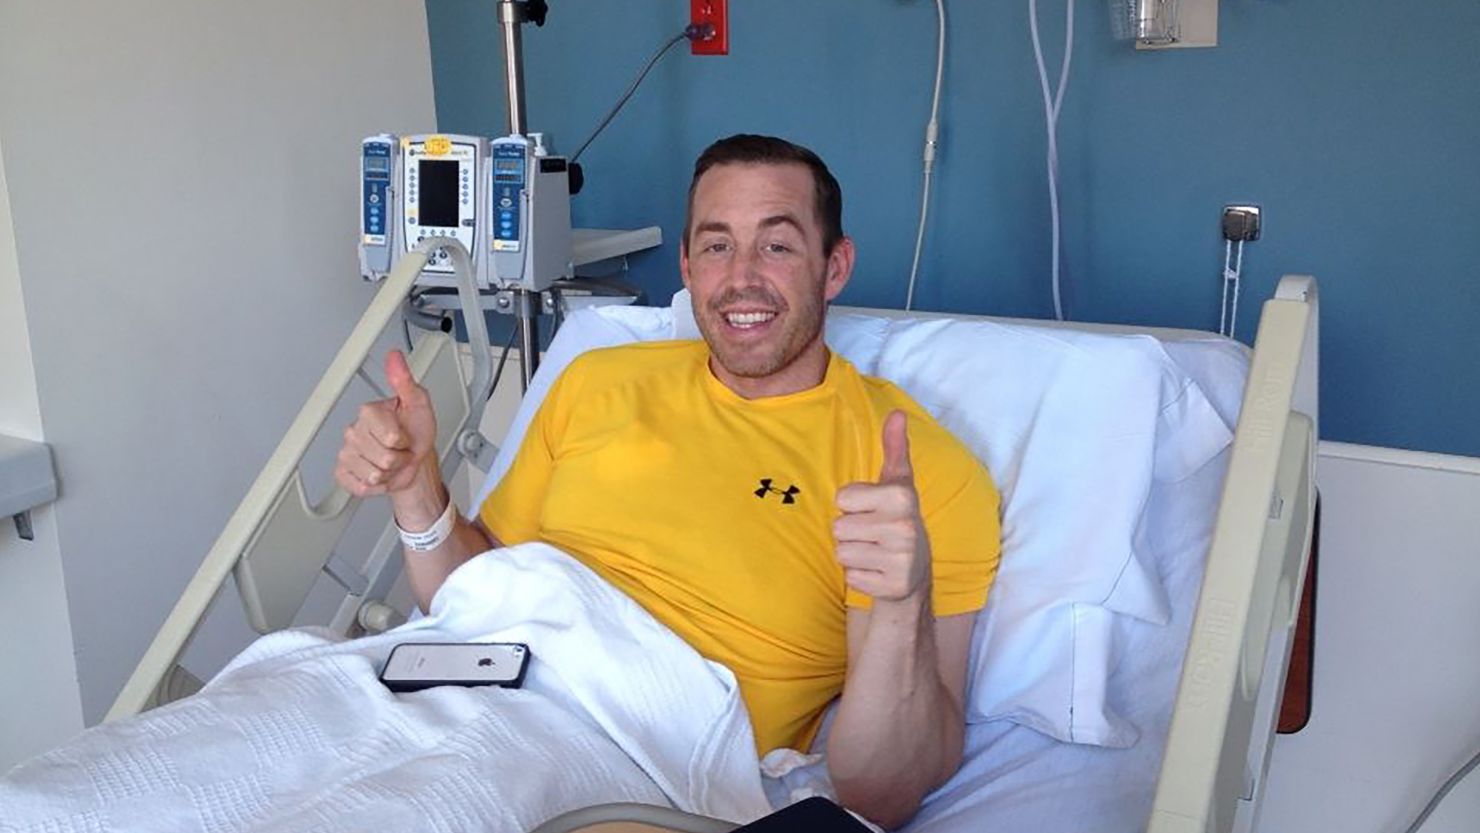 Josh Herting was diagnosed with stage 3 colon cancer at age 34.